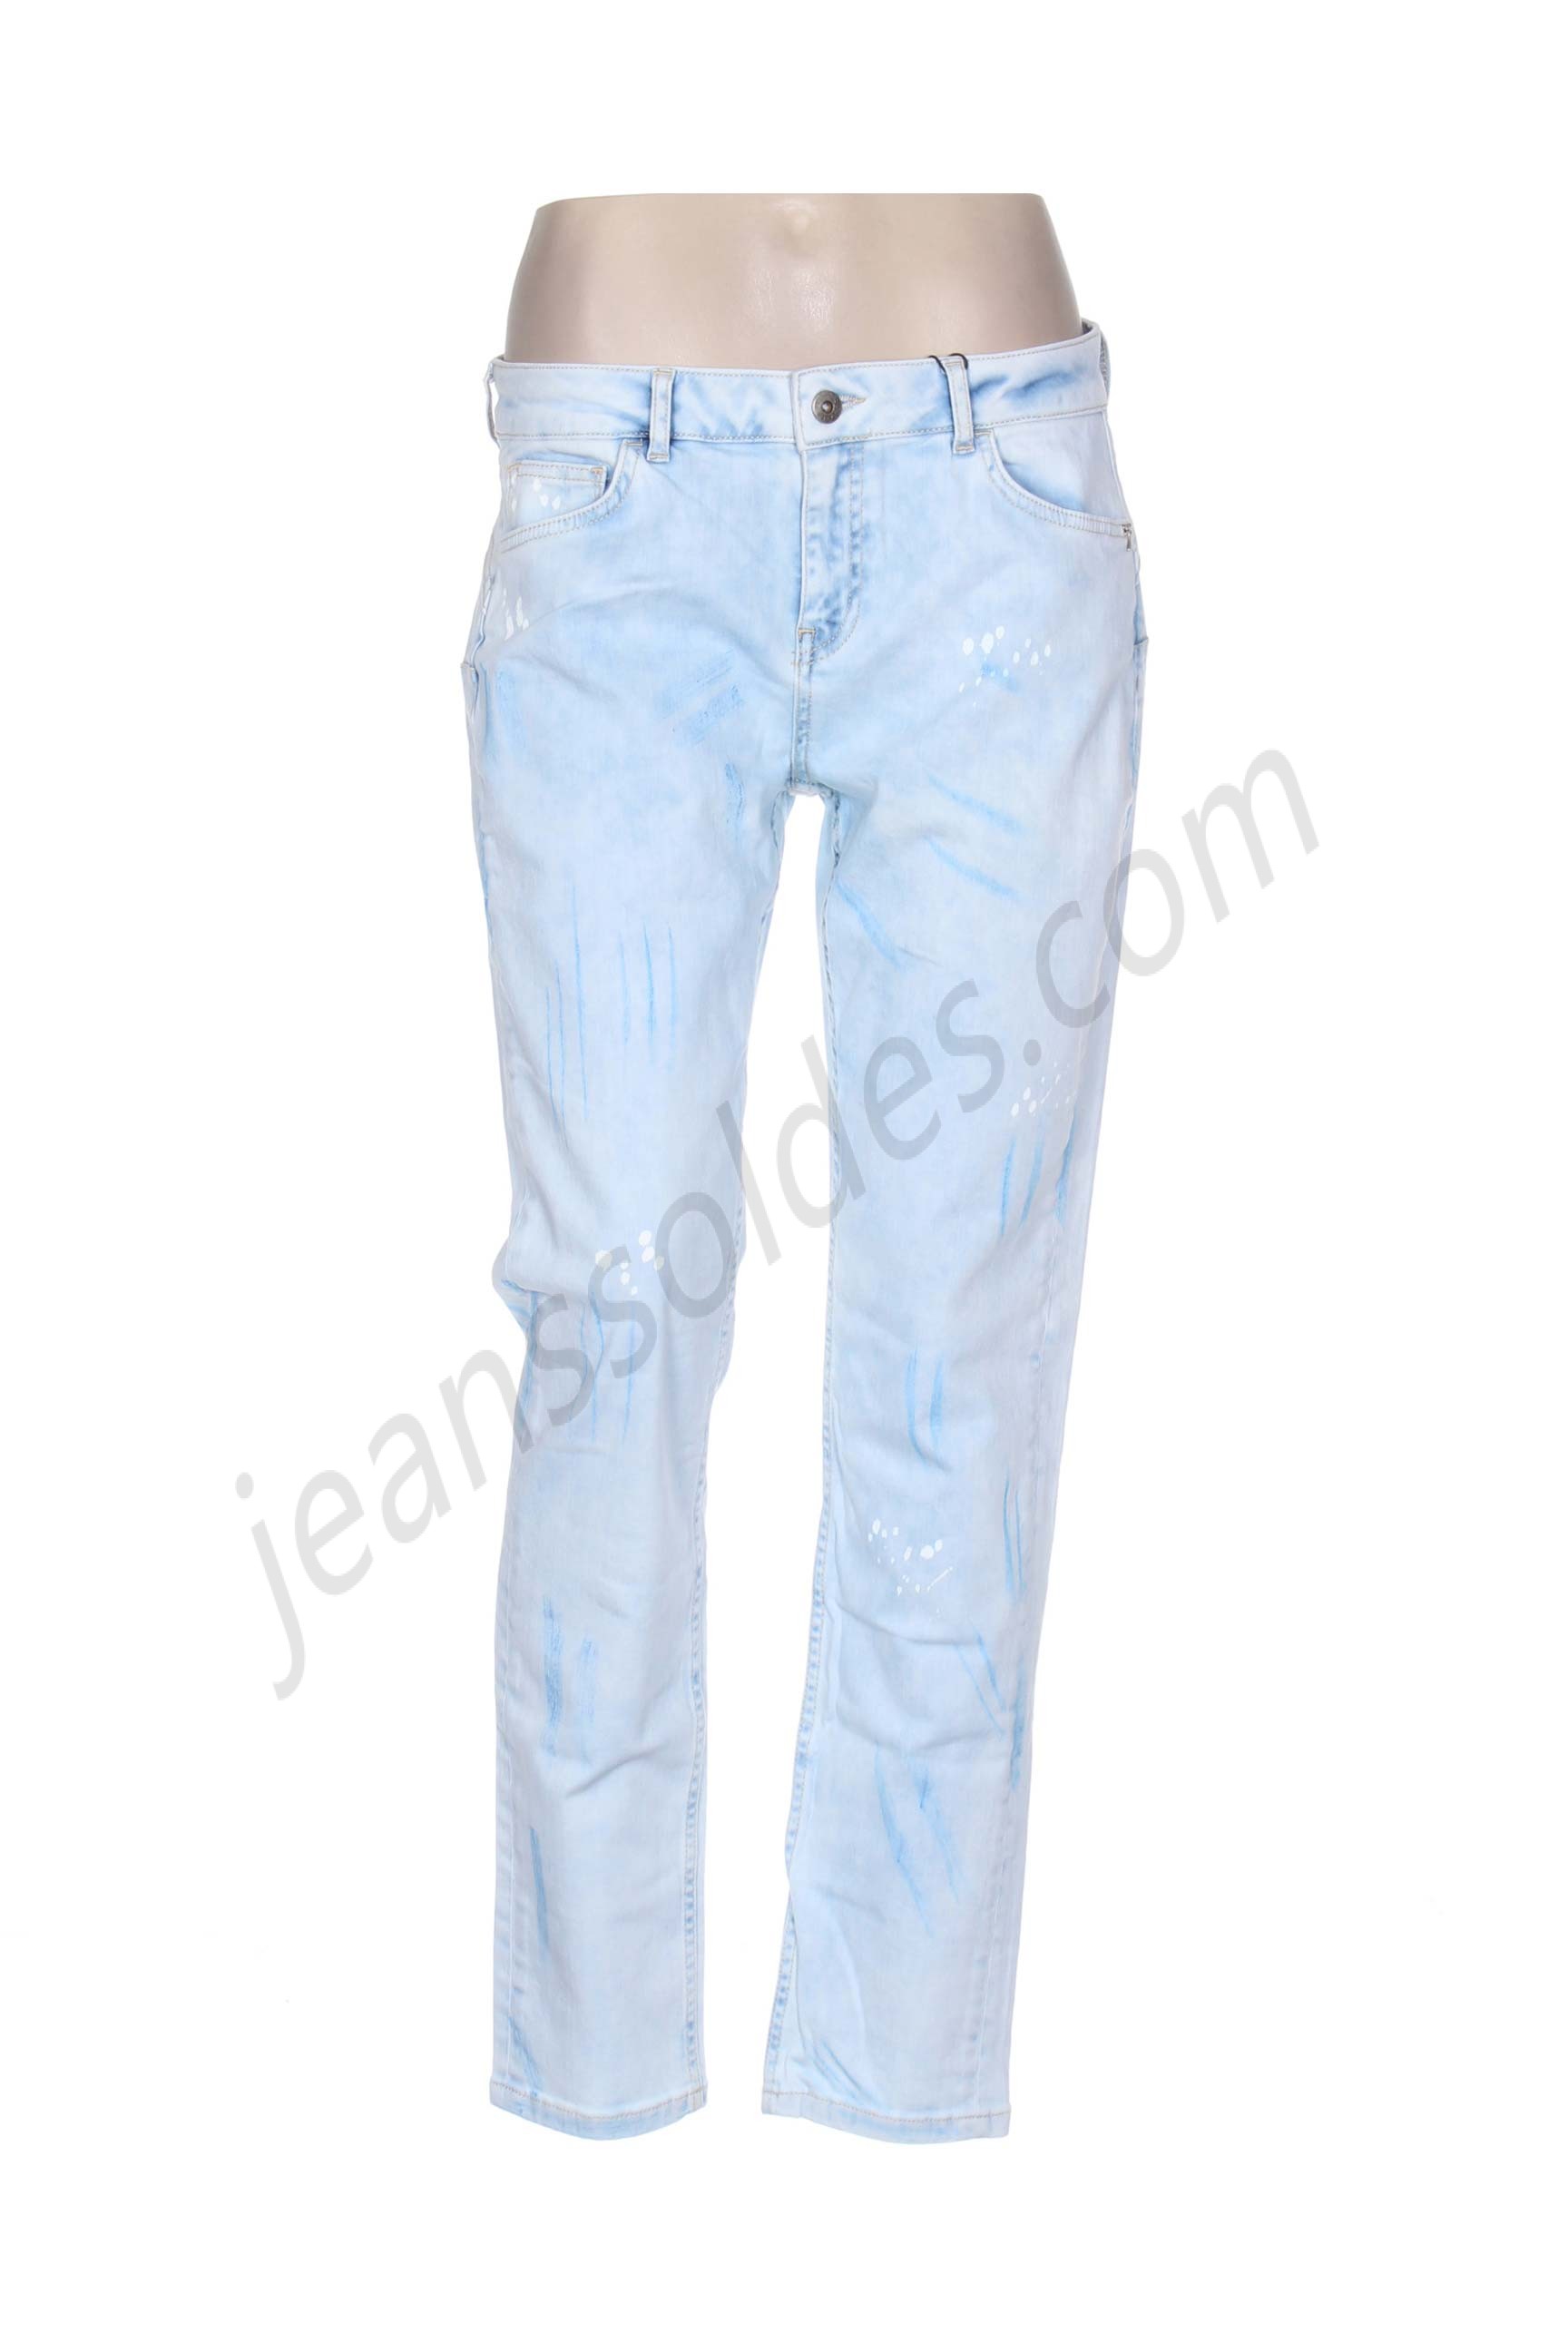 so soon-Jeans coupe slim prix d’amis - so soon-Jeans coupe slim prix d’amis